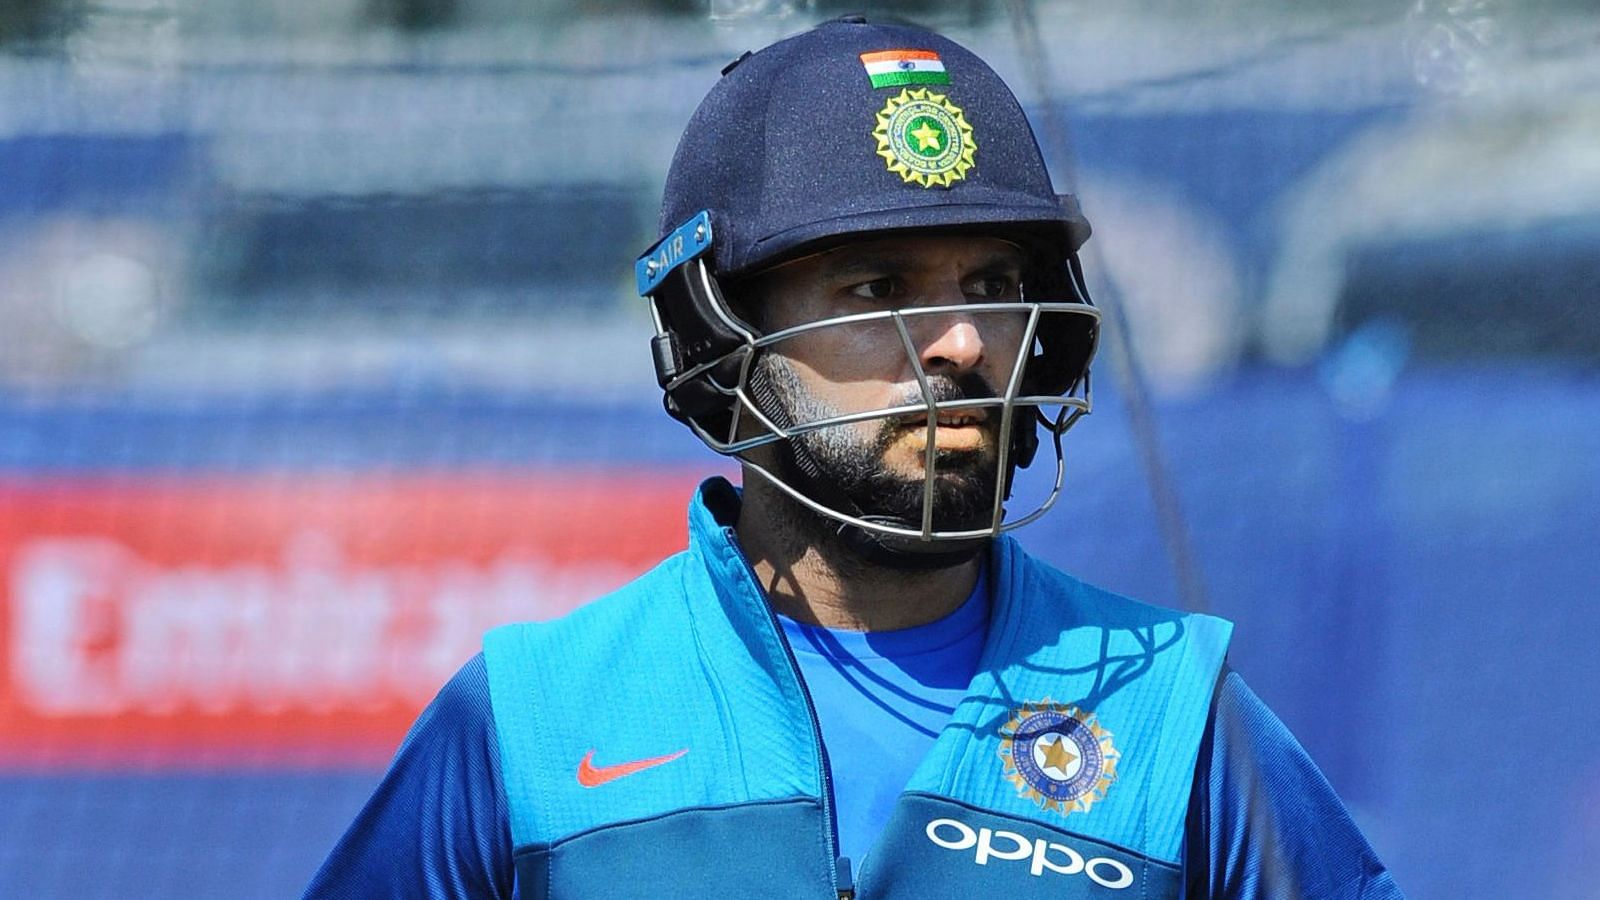 India’s Yuvraj Singh arrives to bat in the nets during a practice session ahead of their ICC Champions Trophy Group B match against Pakistan.